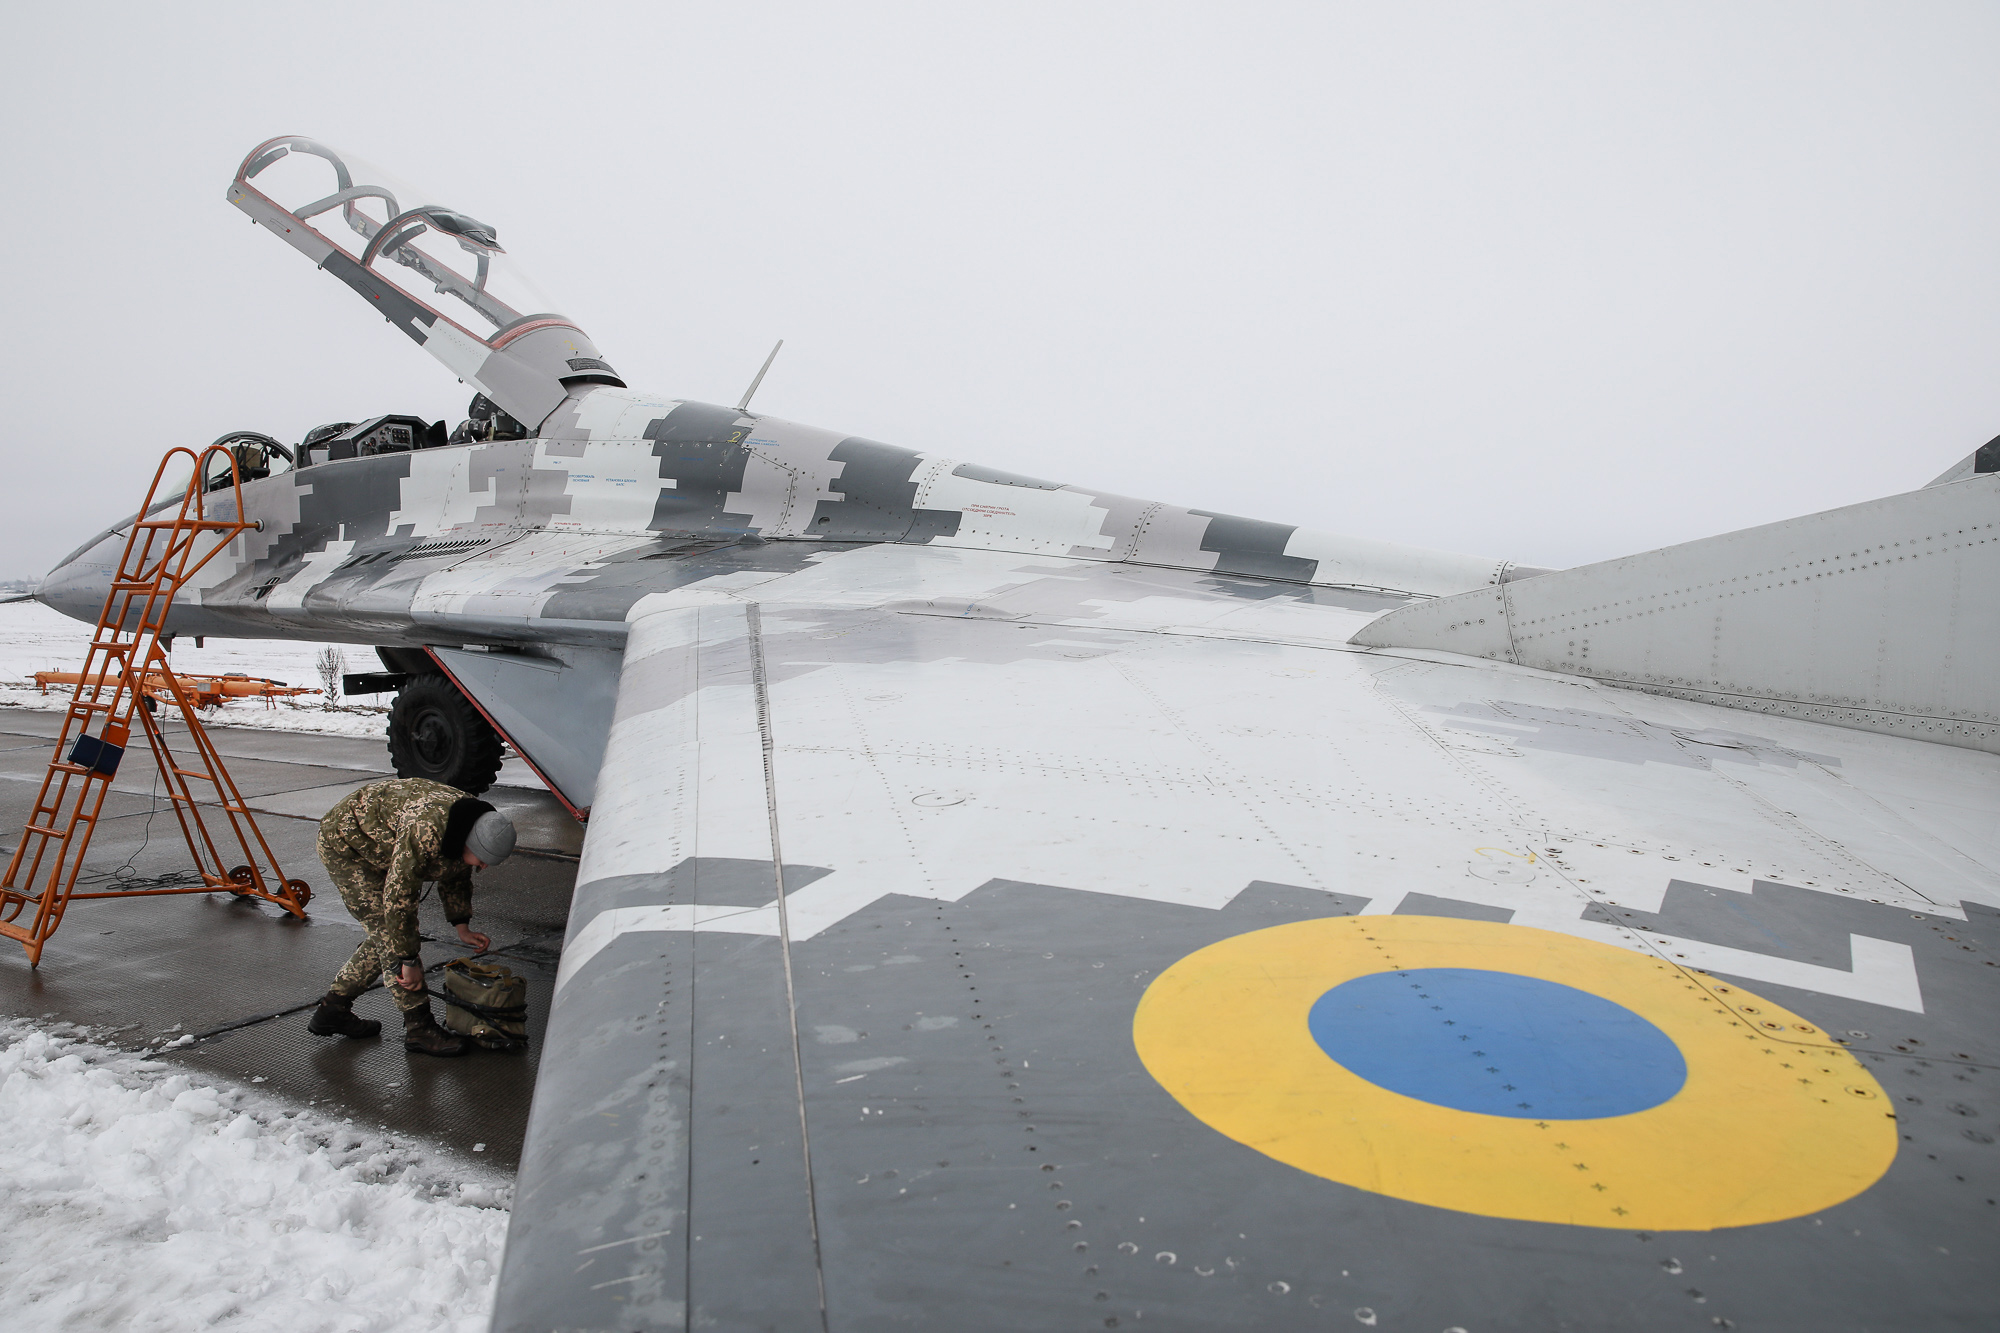 A service technician prepares a Mikoyan MiG-29 fighter for a practice flight at Repair technicians inspect a Ukrainian Air Force&#8217;s L-39 Albatros training plane at an airbase of Vasylkiv on Feb. 14, 2019.